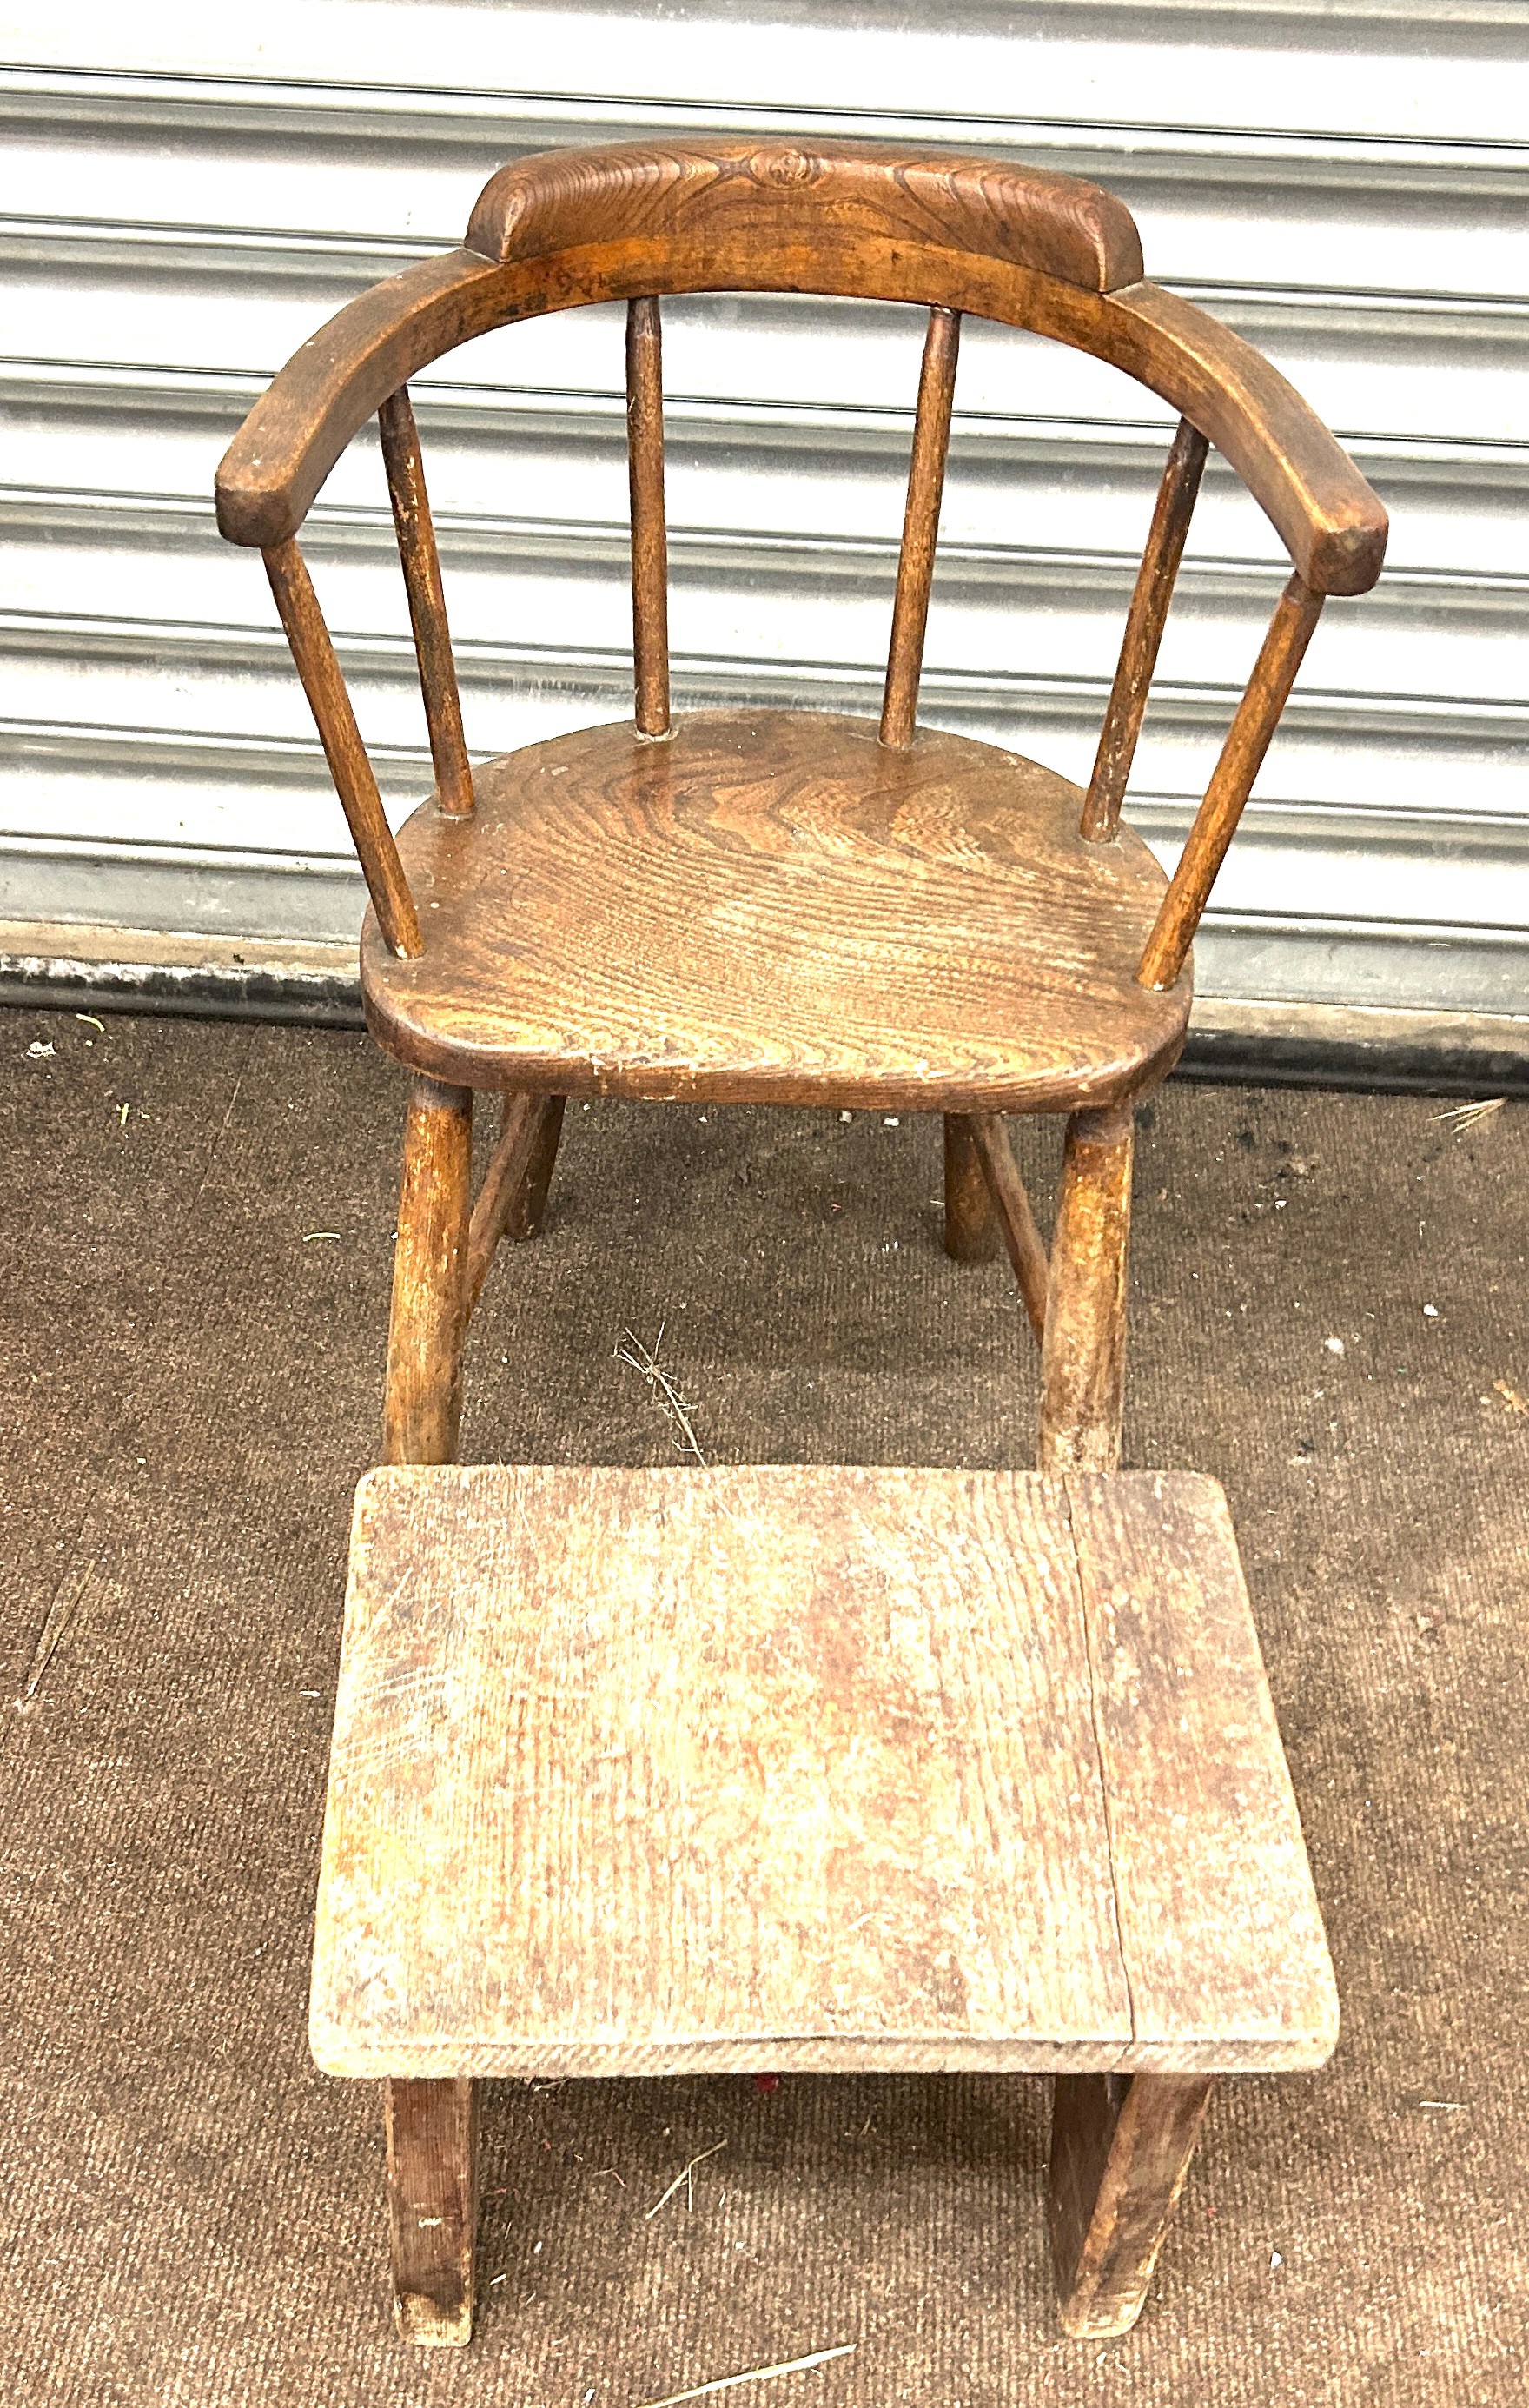 Childs chair and foot stool